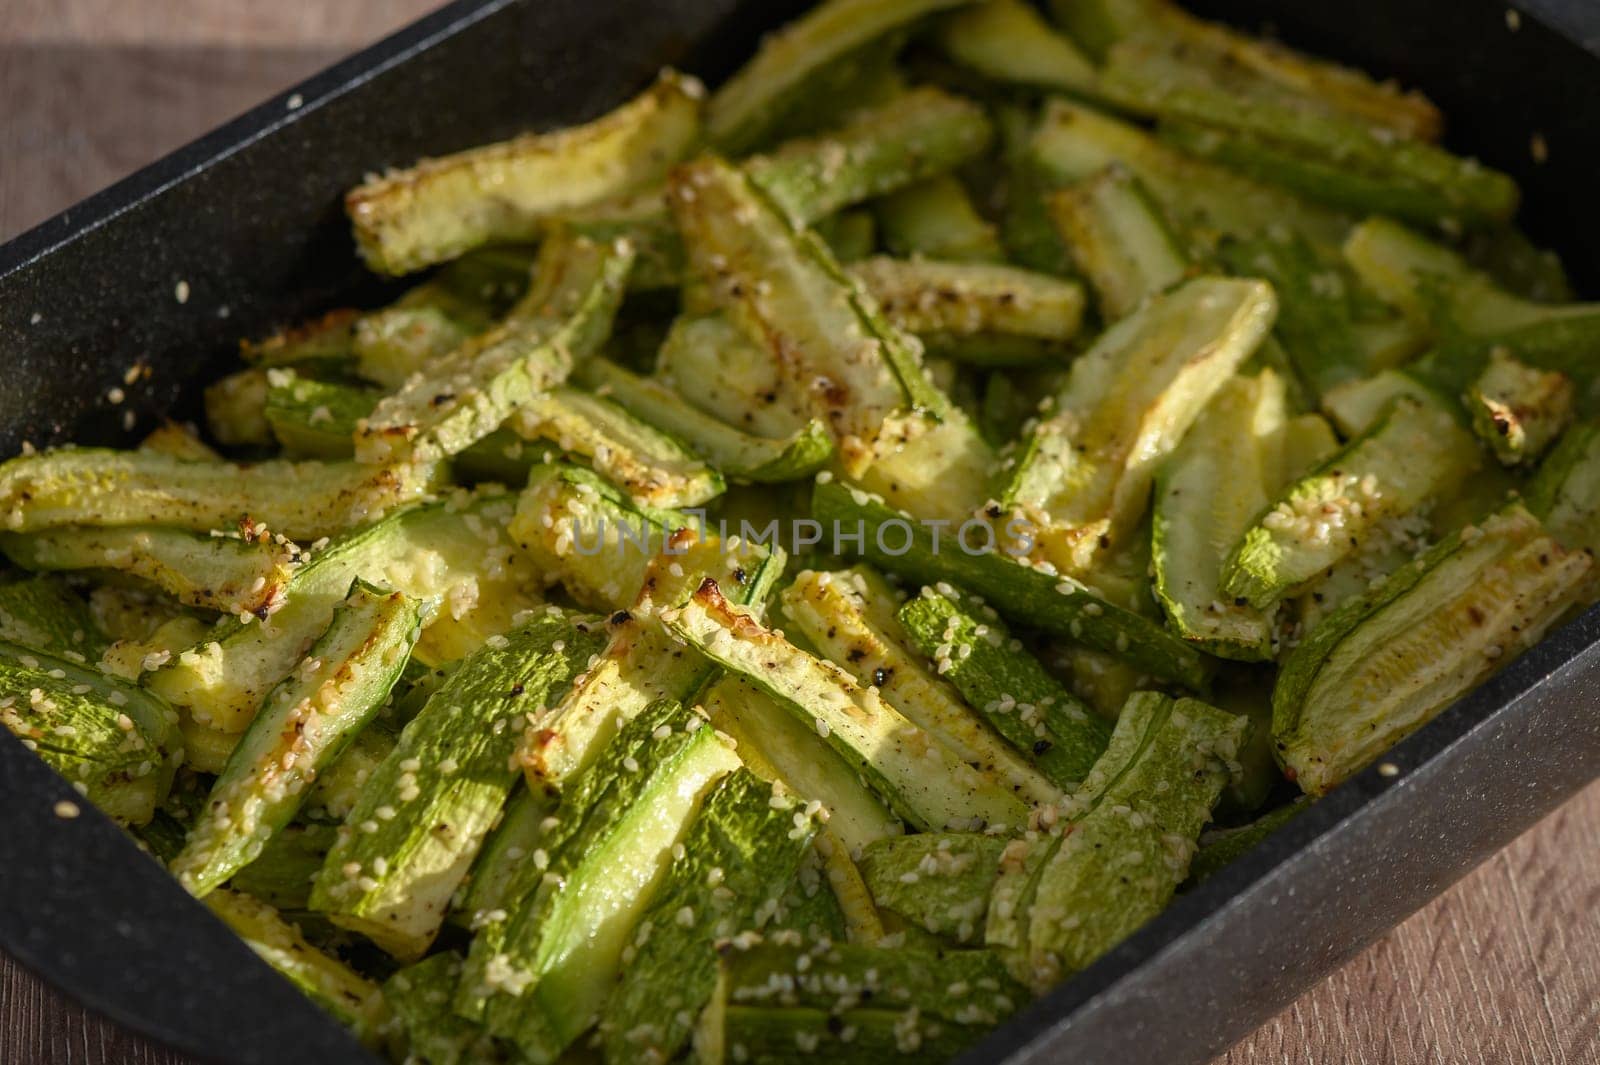 zucchini baked in the oven on a wooden table in the kitchen 1 by Mixa74